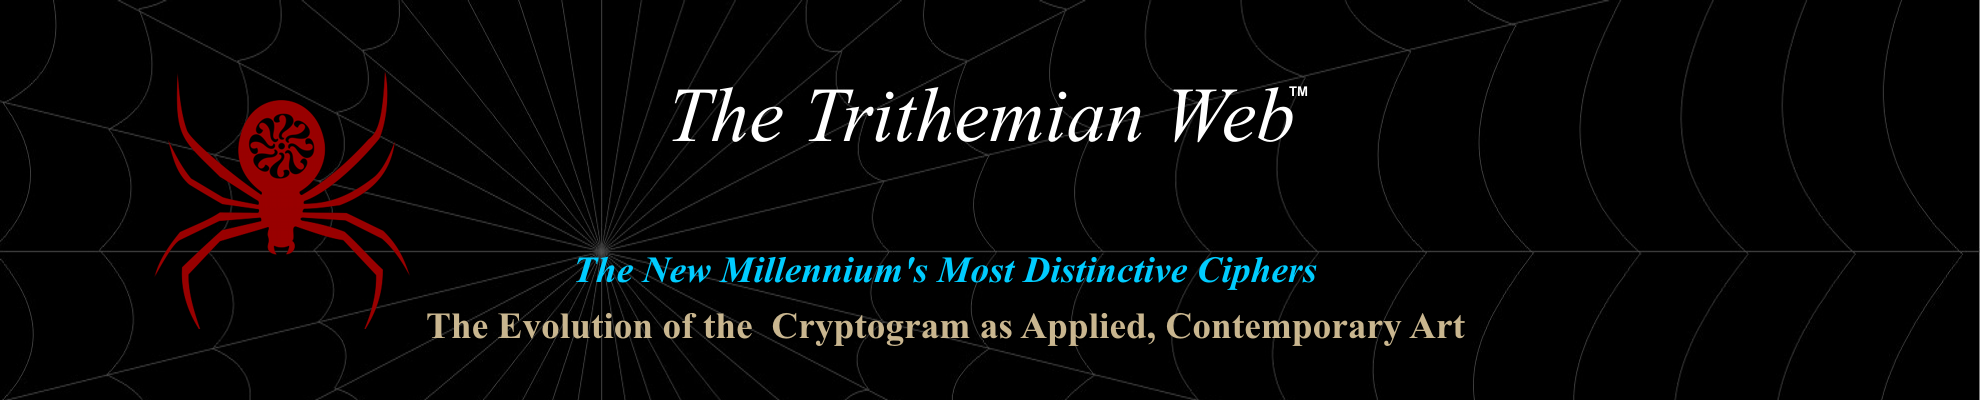 The Trithemian Web™